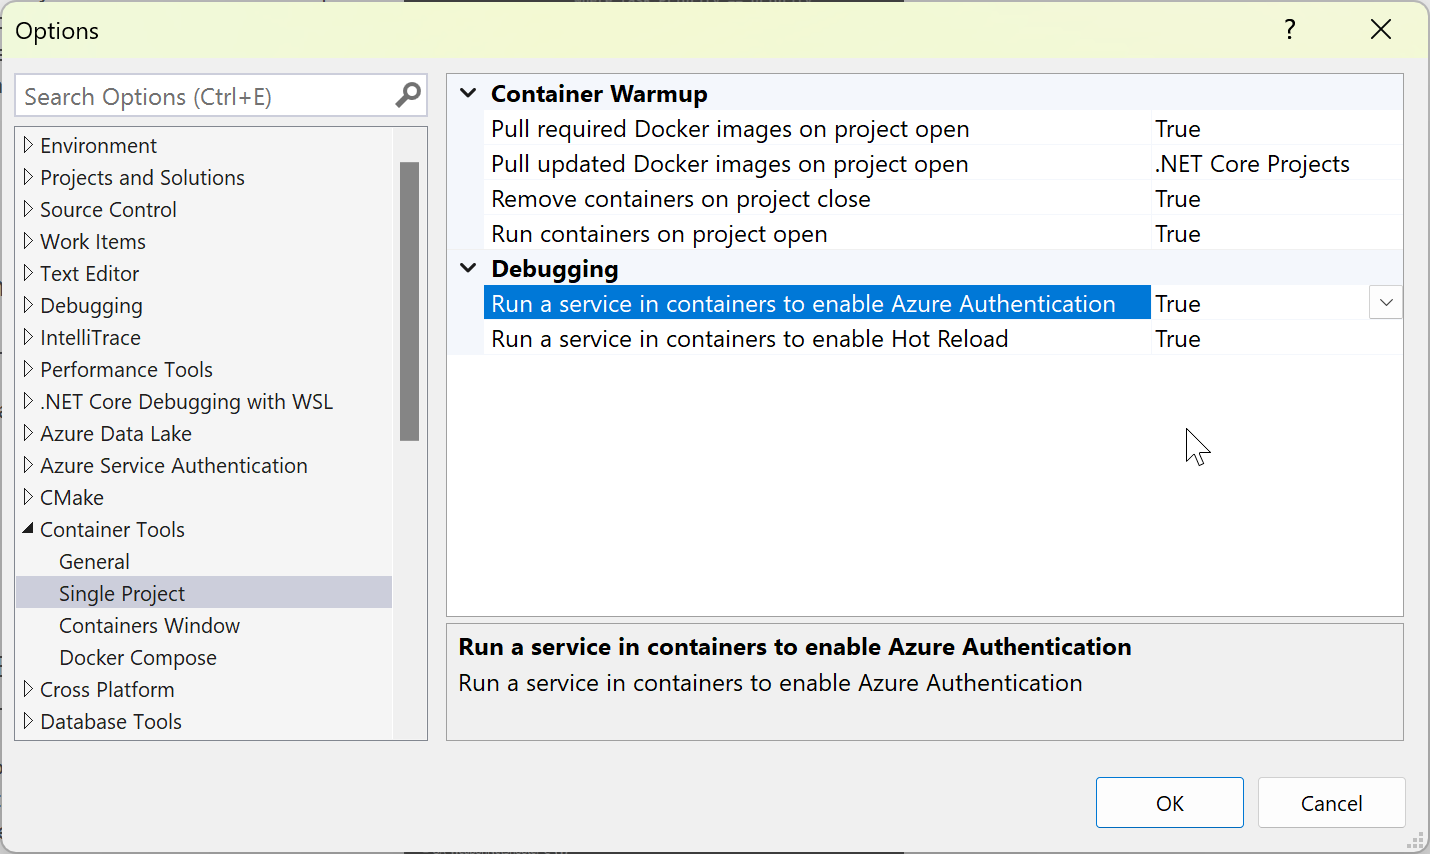 Visual Studio Container Tools options, showing: Kill containers on project close, Pull required Docker images on project open, Run containers on project open, Run a service in containers to enable Azure Authentication, and Run a run a service in containers to enable Opětovné načítání za provozu.